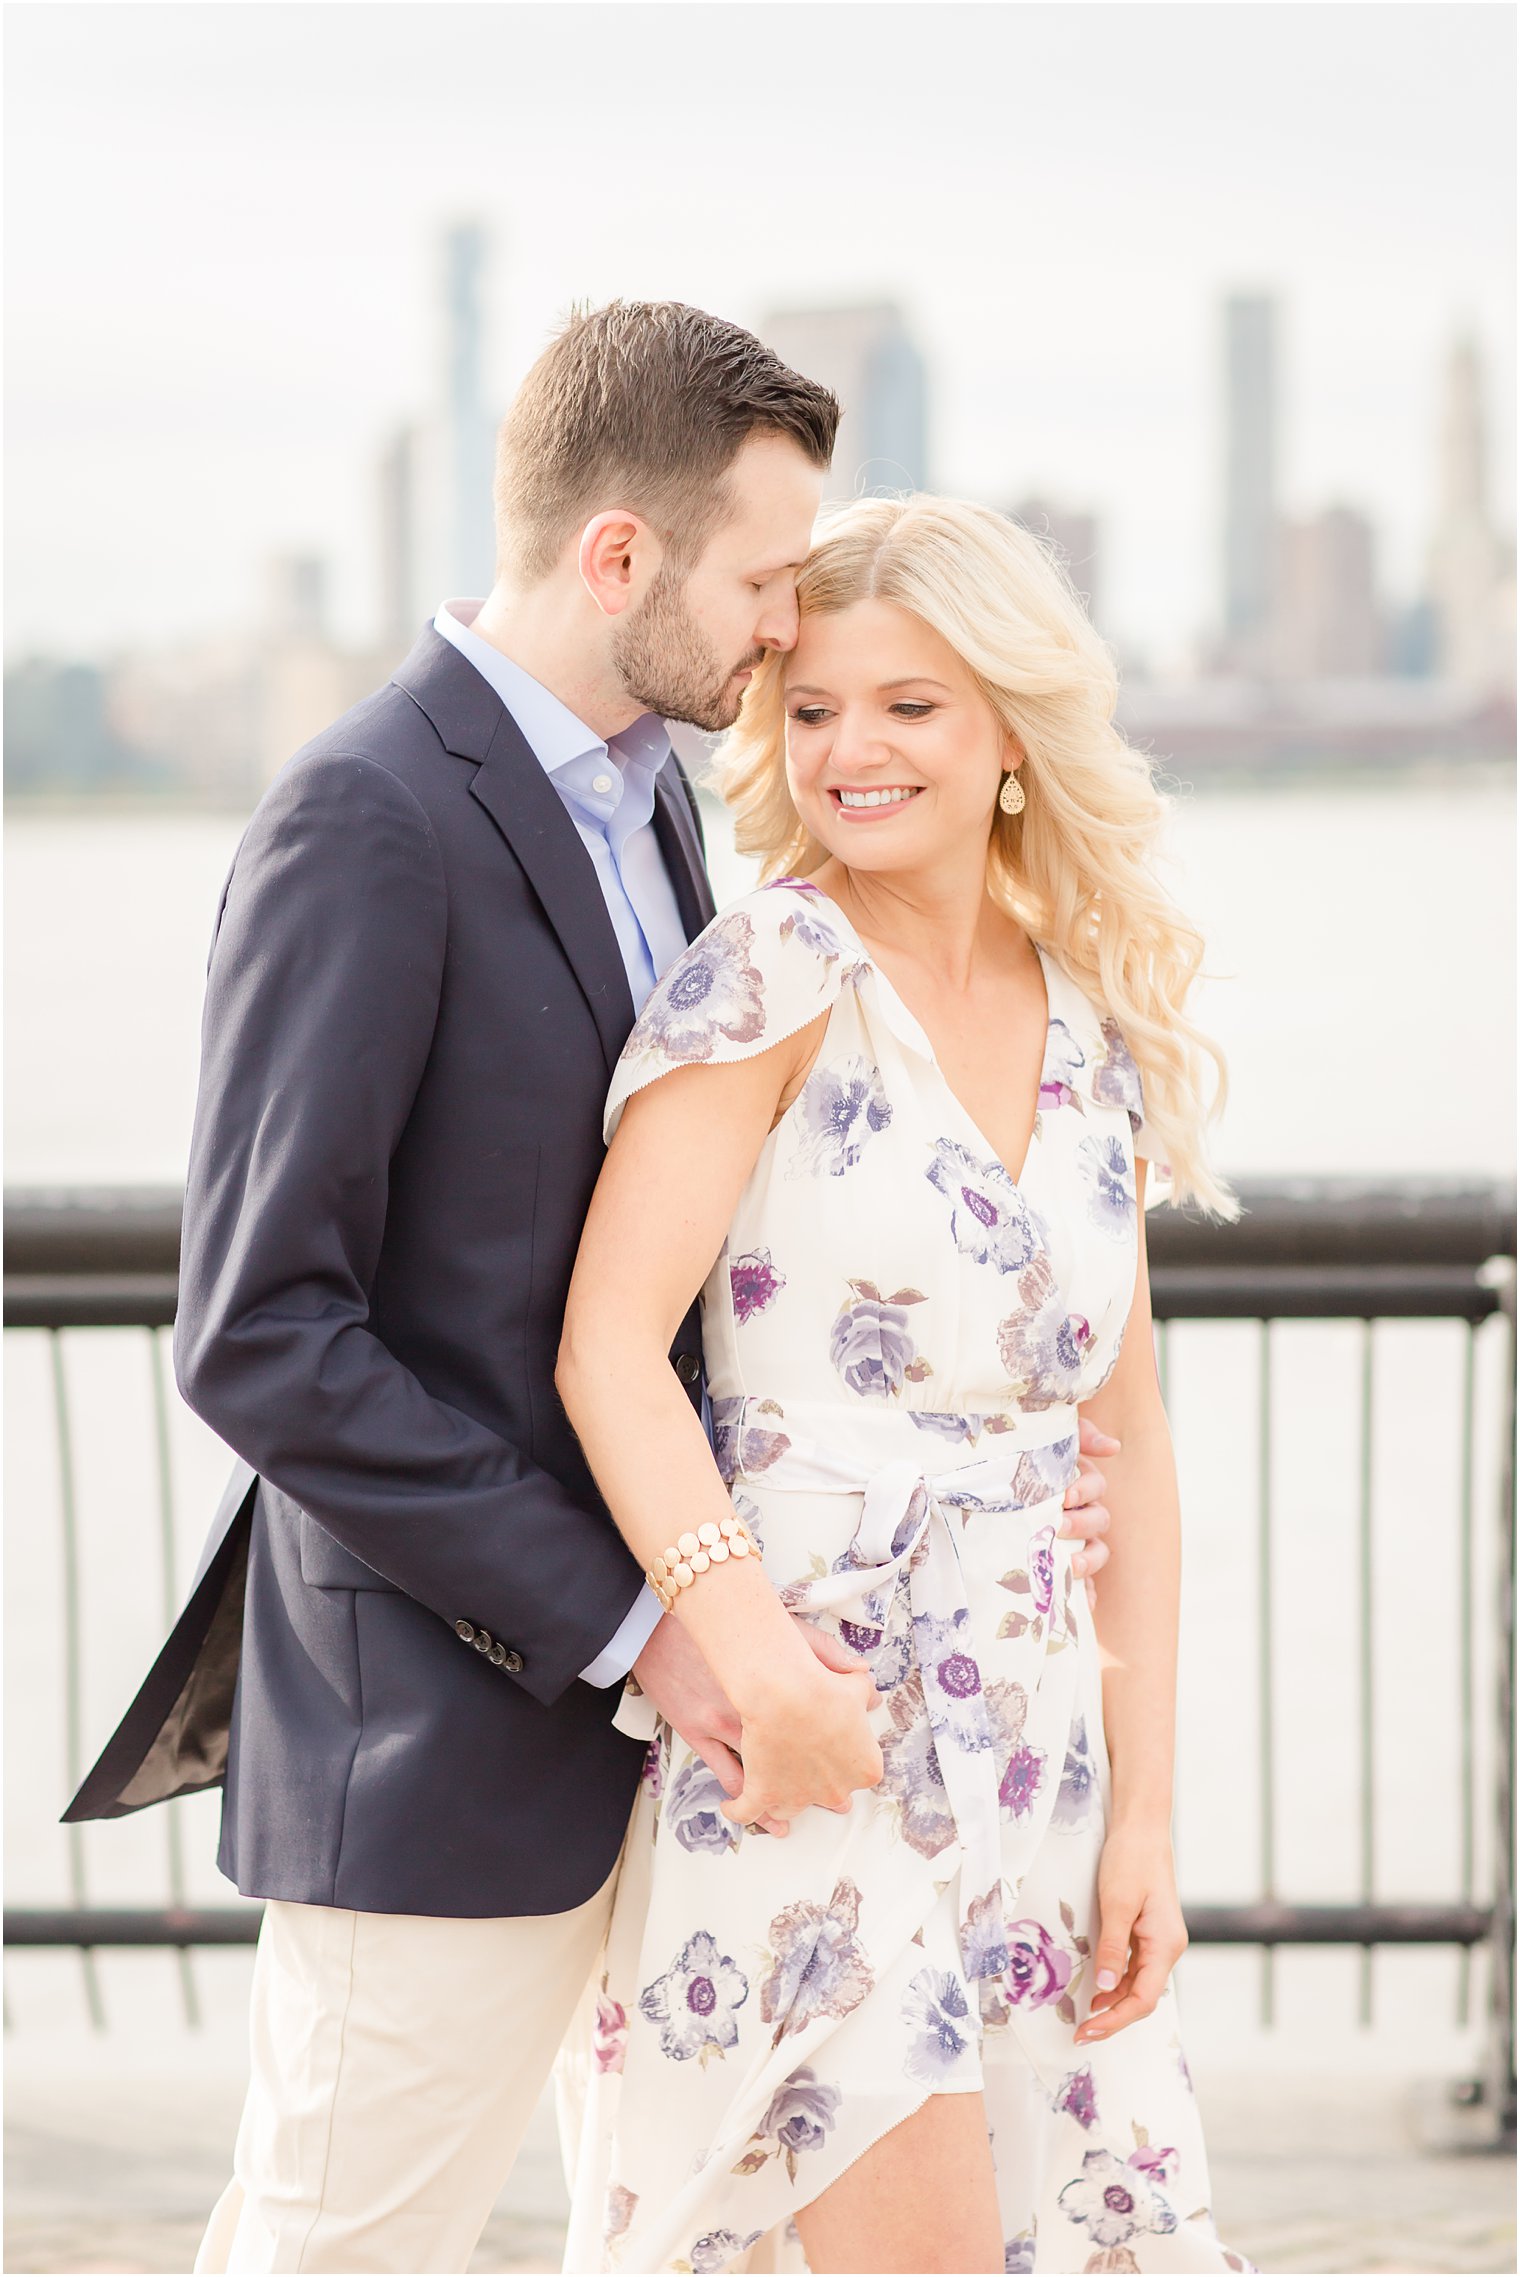 engagement photo outfit ideas with floral dress and navy suit